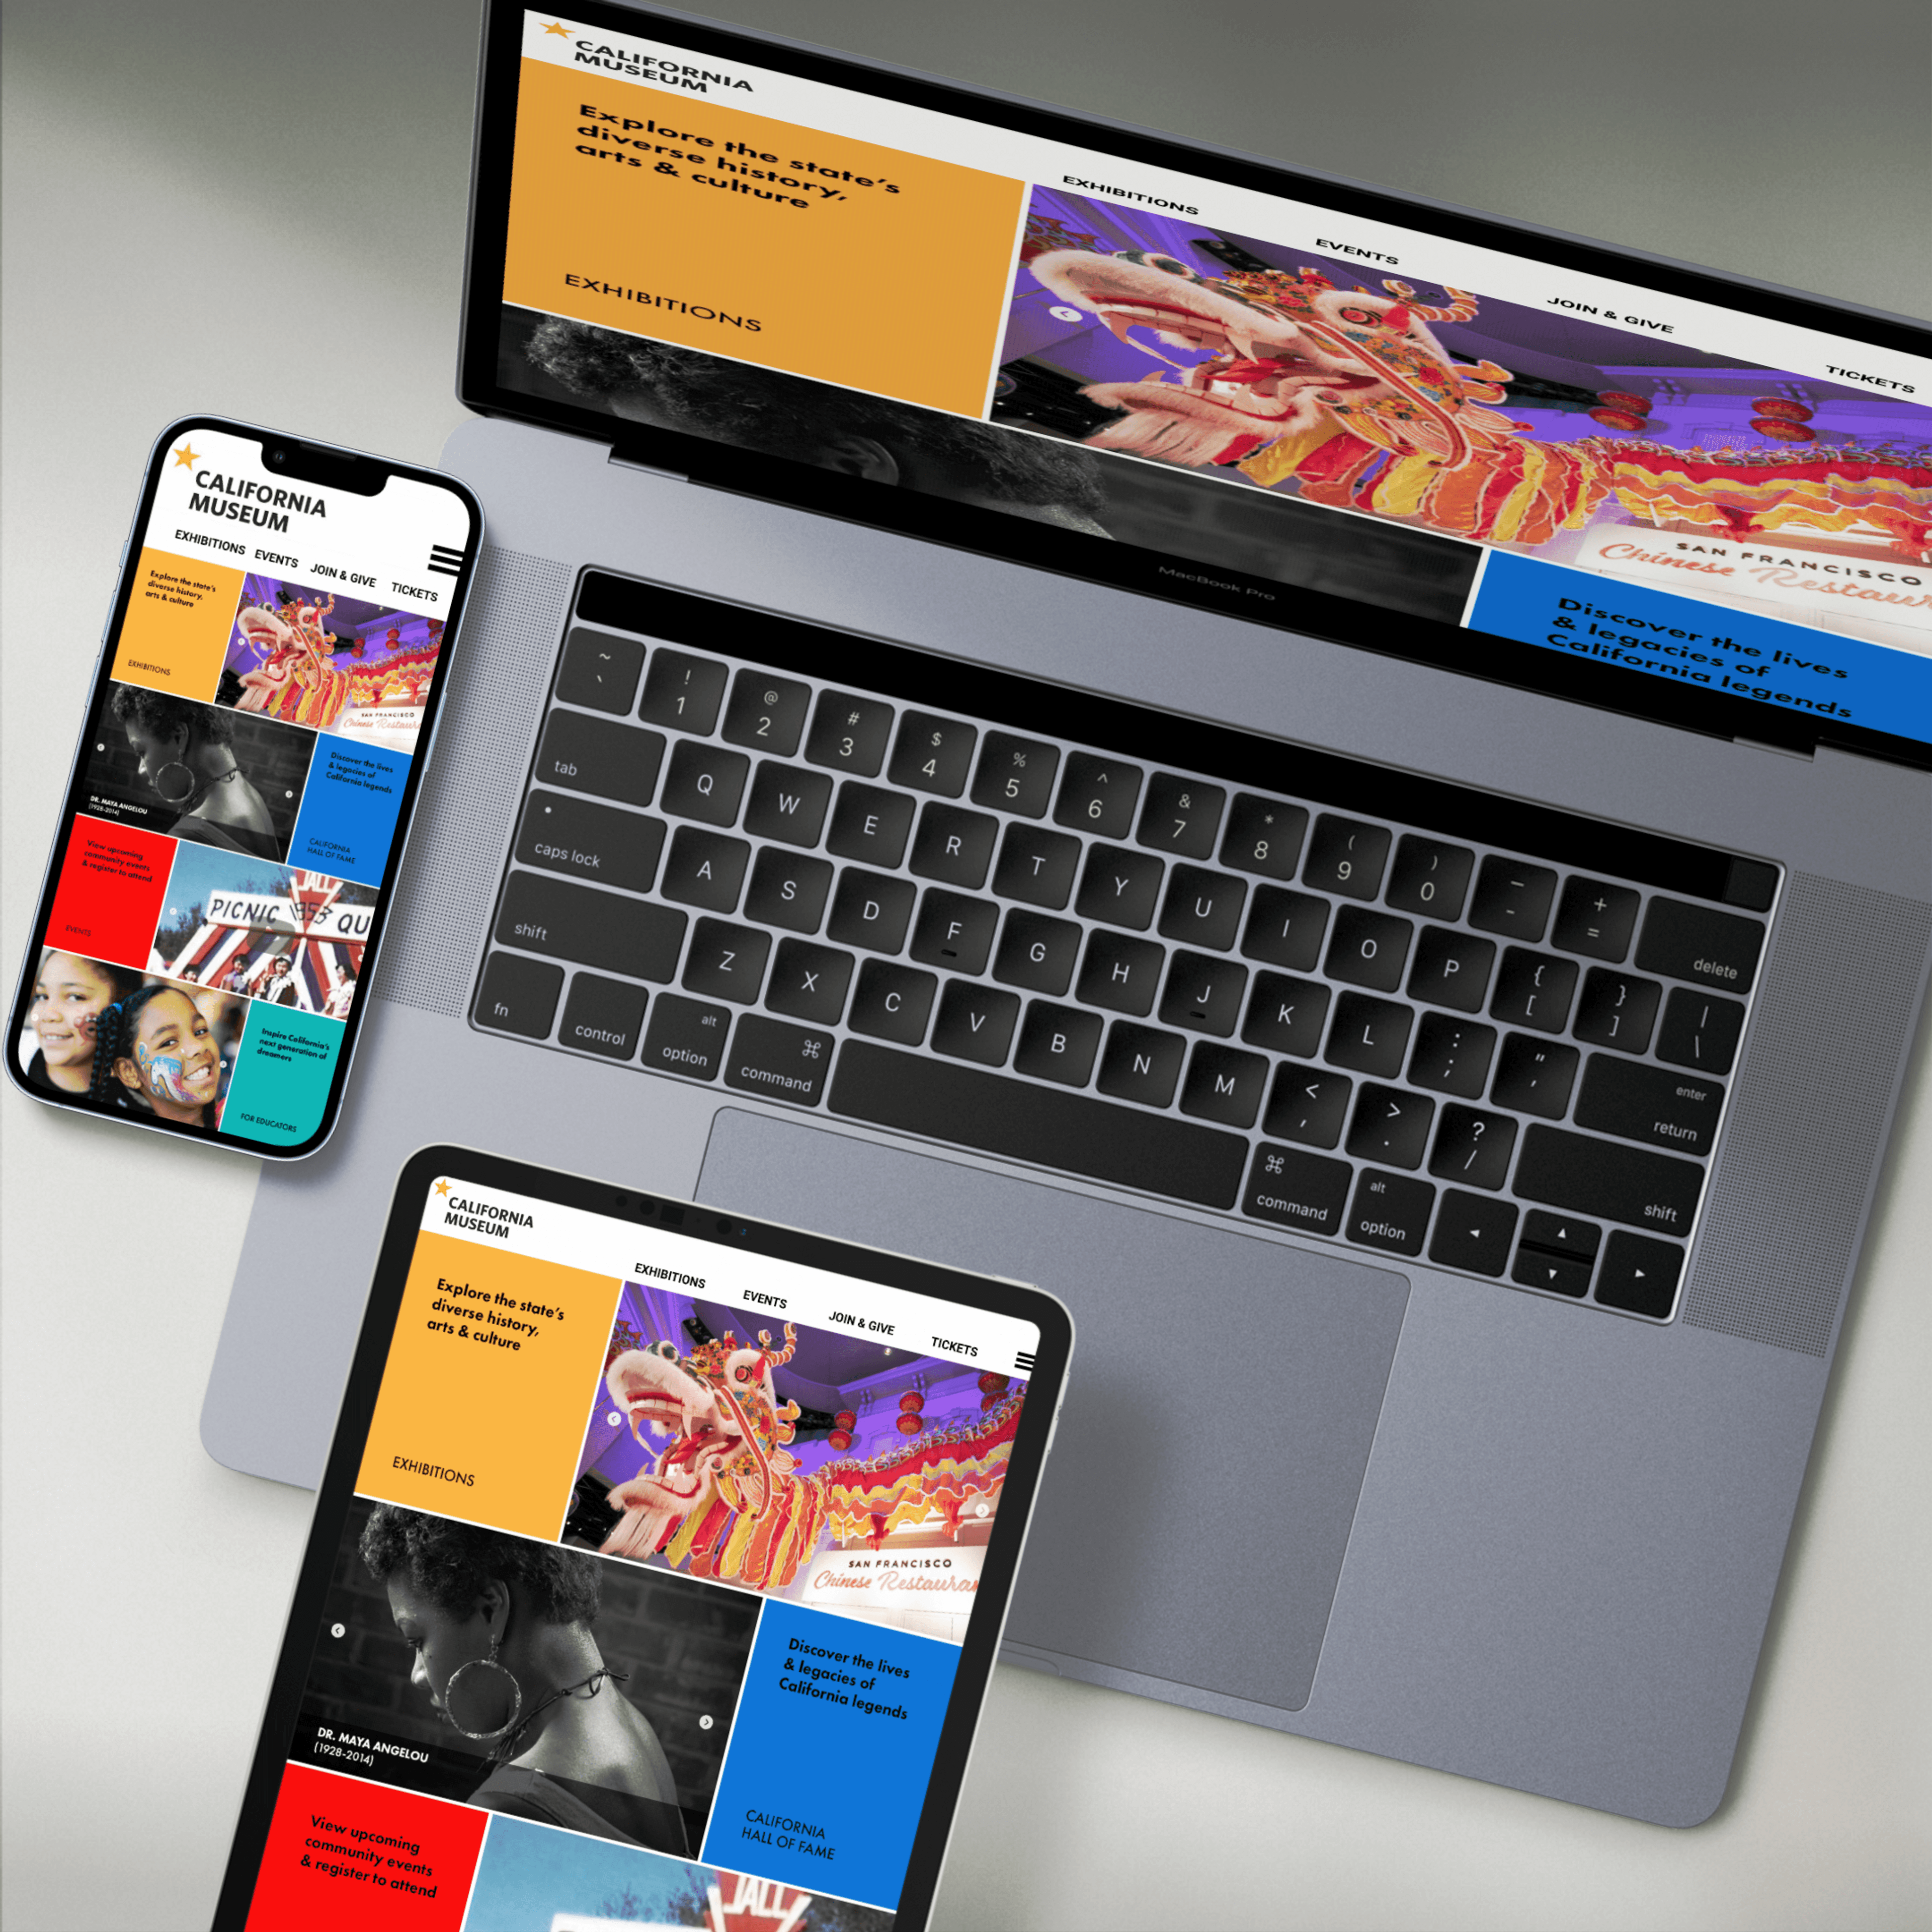 UX/UI design of a responsive website for the California Museum built in WordPress by Brenna Hamilton.